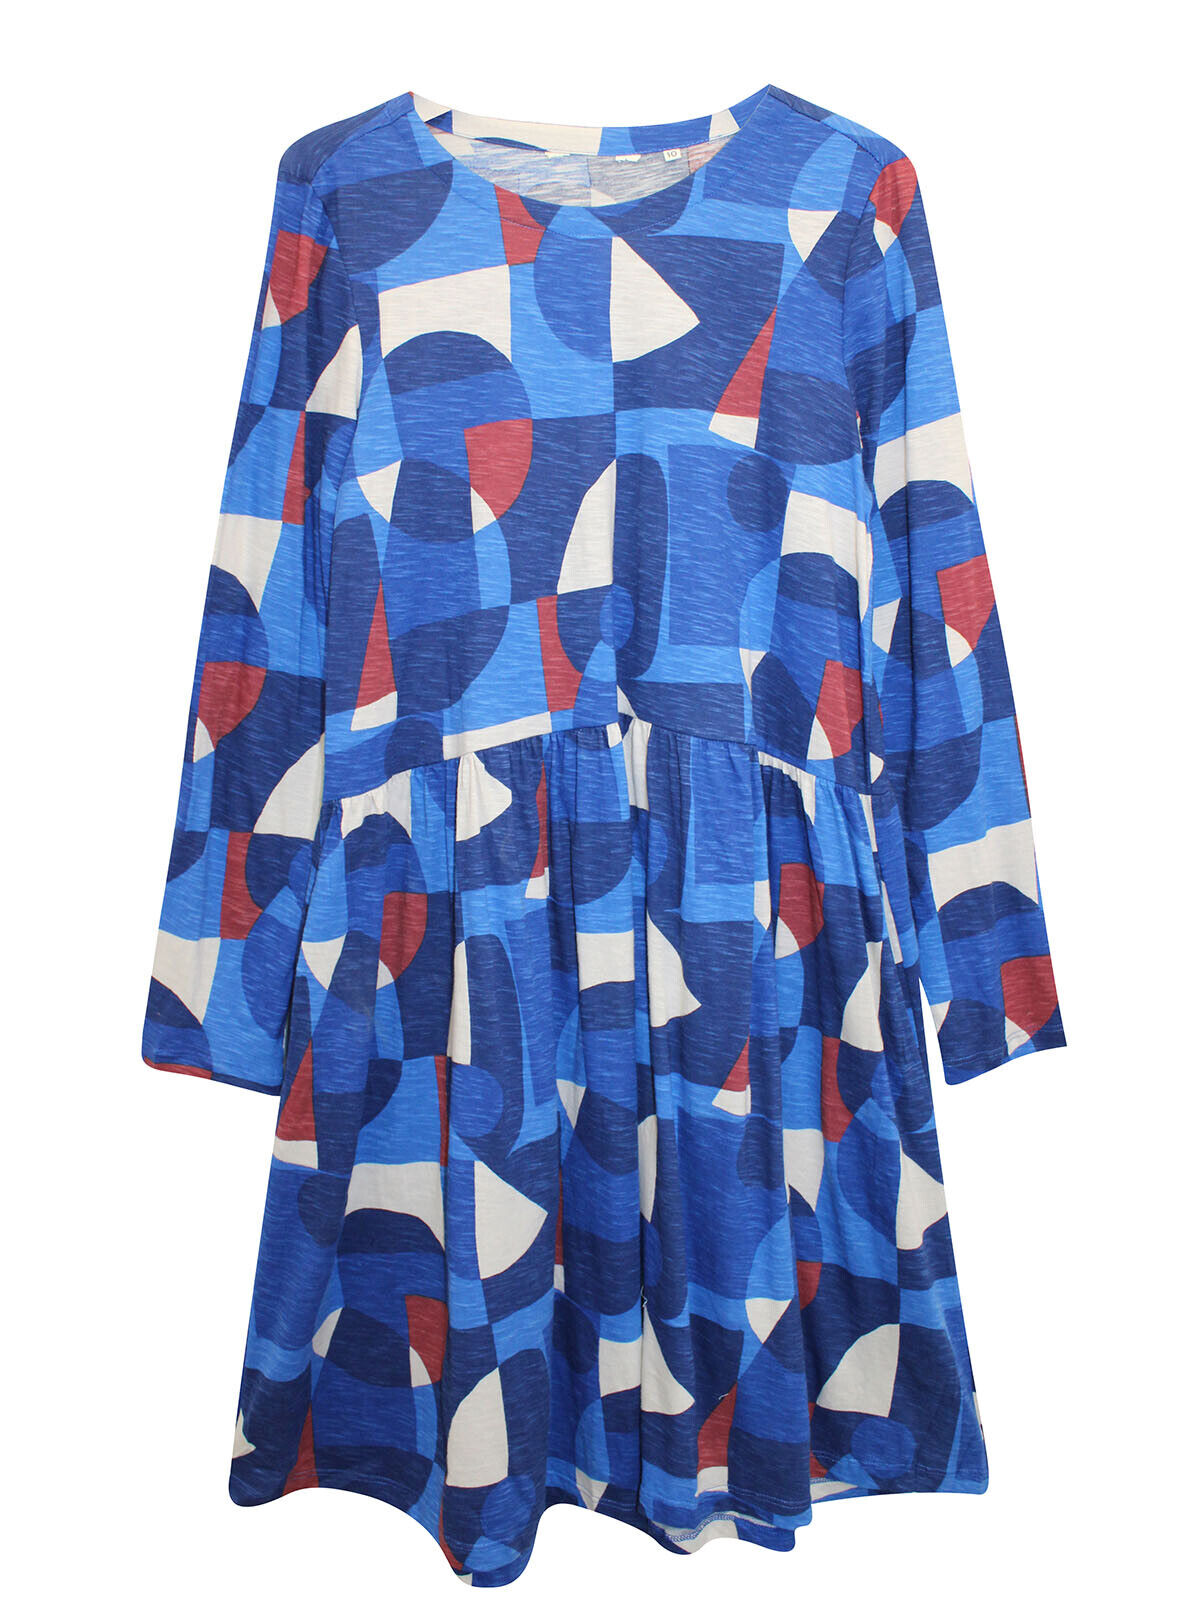 EX Seasalt Blue Abstract Collage Sapphire Sea Mirror Dress Sizes 10 -24 RRP £55